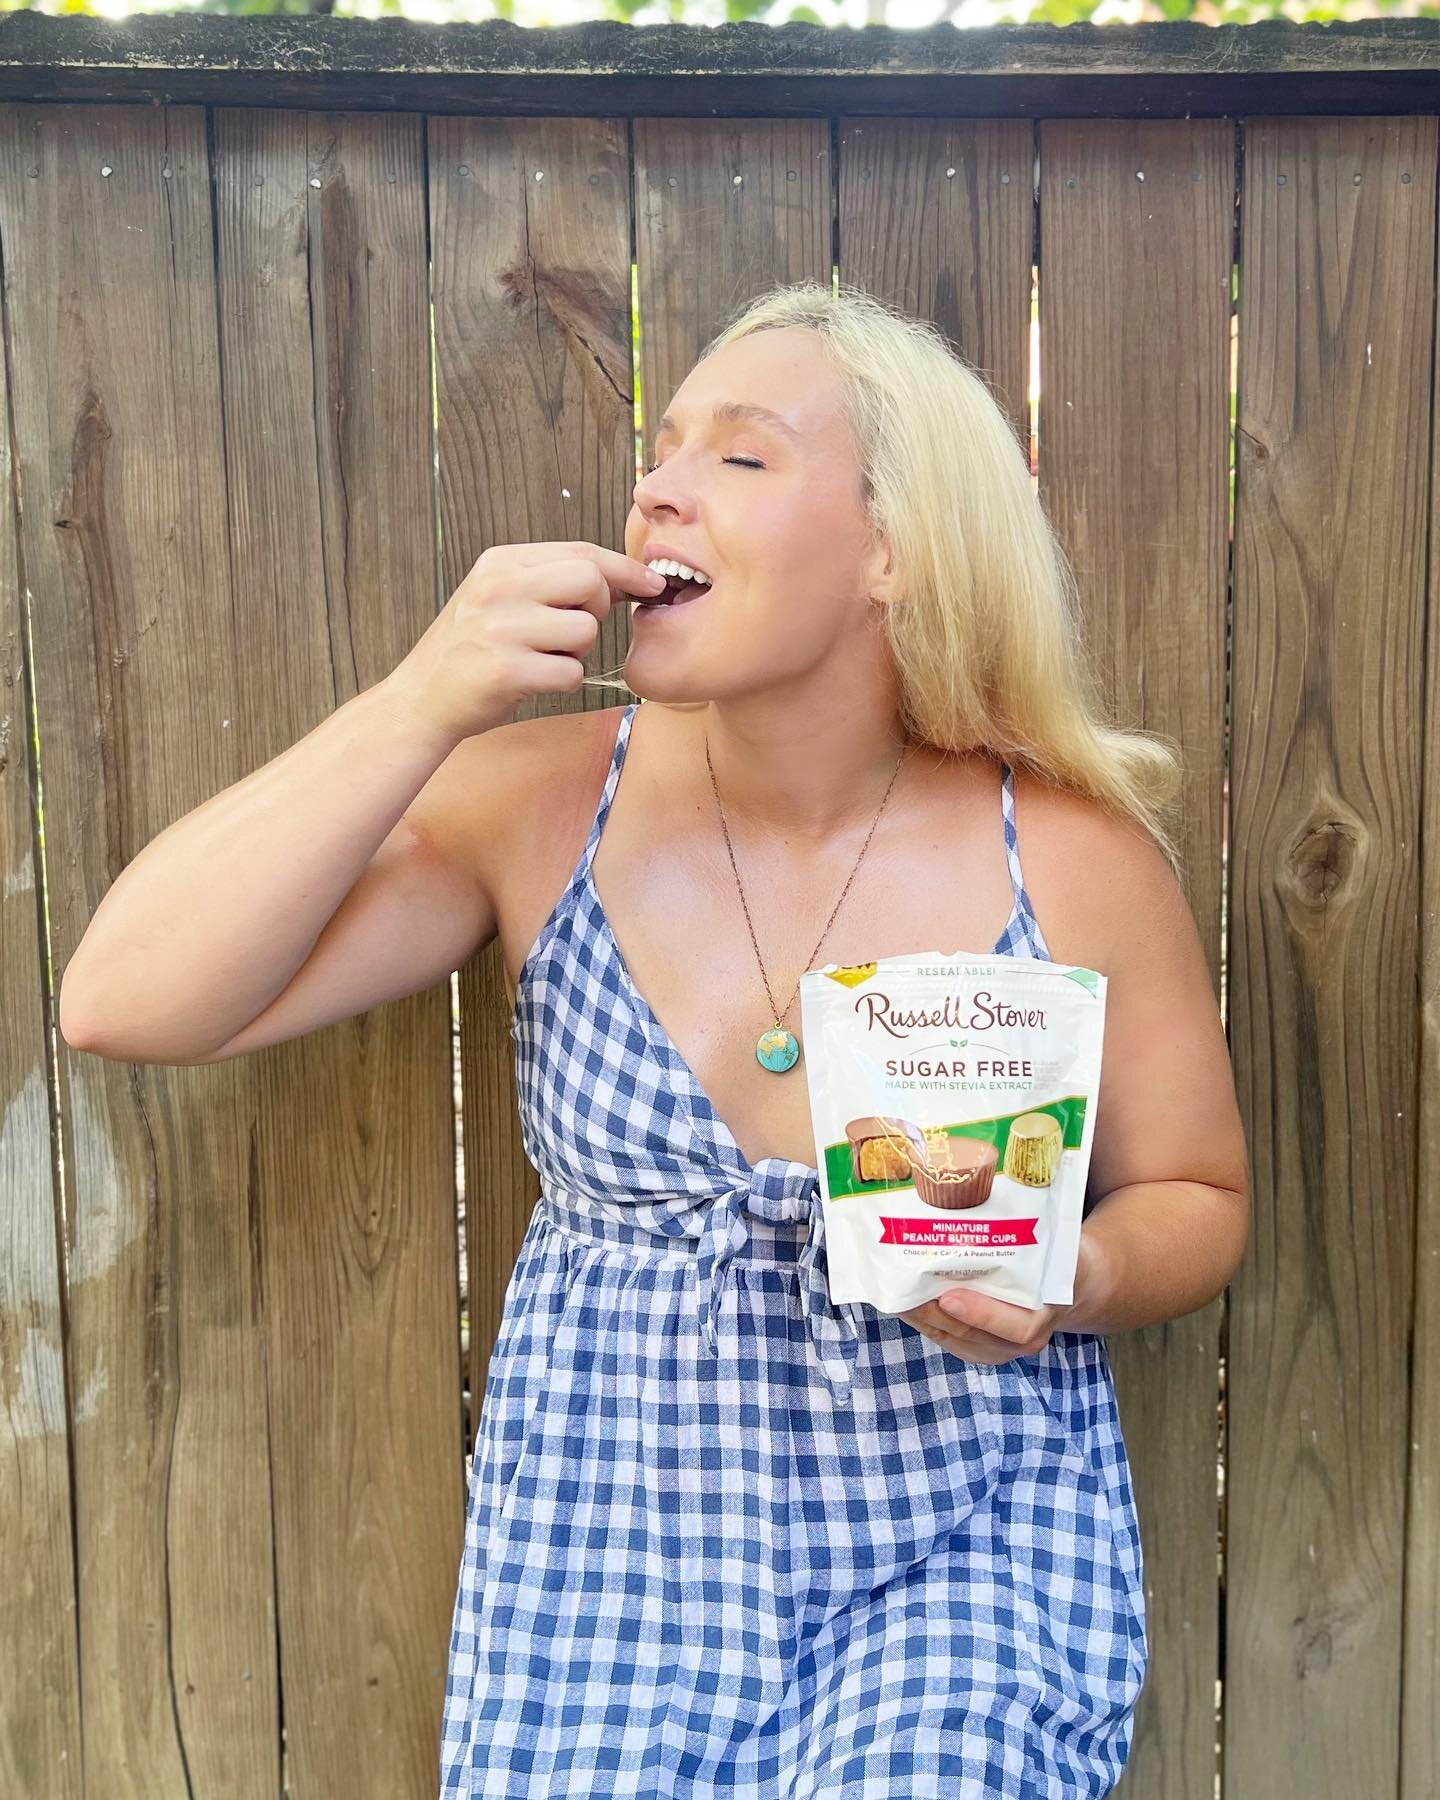 Oh man do I have a sweet tooth! Im always looking to reduce the amount of sugar in my diet without sacrificing on taste. #sponsored @russellstoverus 

With Russell Stover&rsquo;s Sugar Free Candies, I can feel free to indulge in my favorite treats wi